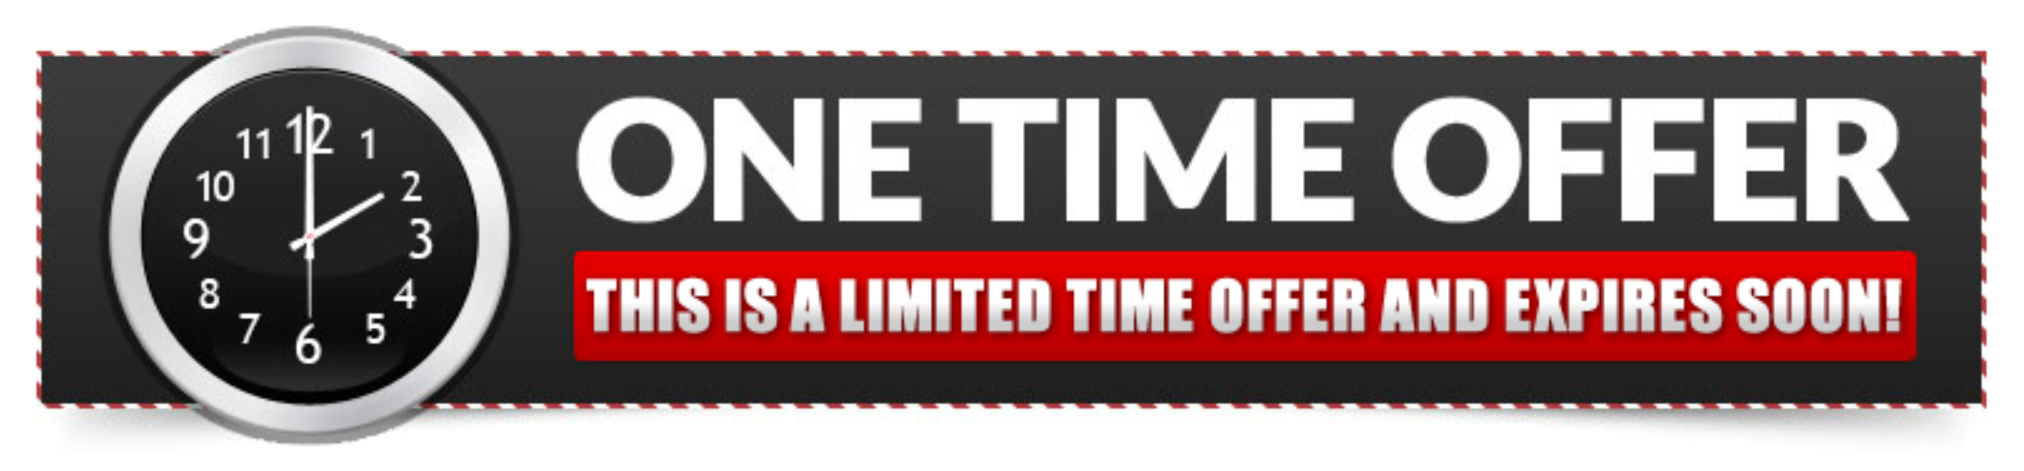 Offers limit. Limited time offer. Time limit offer иконка. One time offer. Limited время.